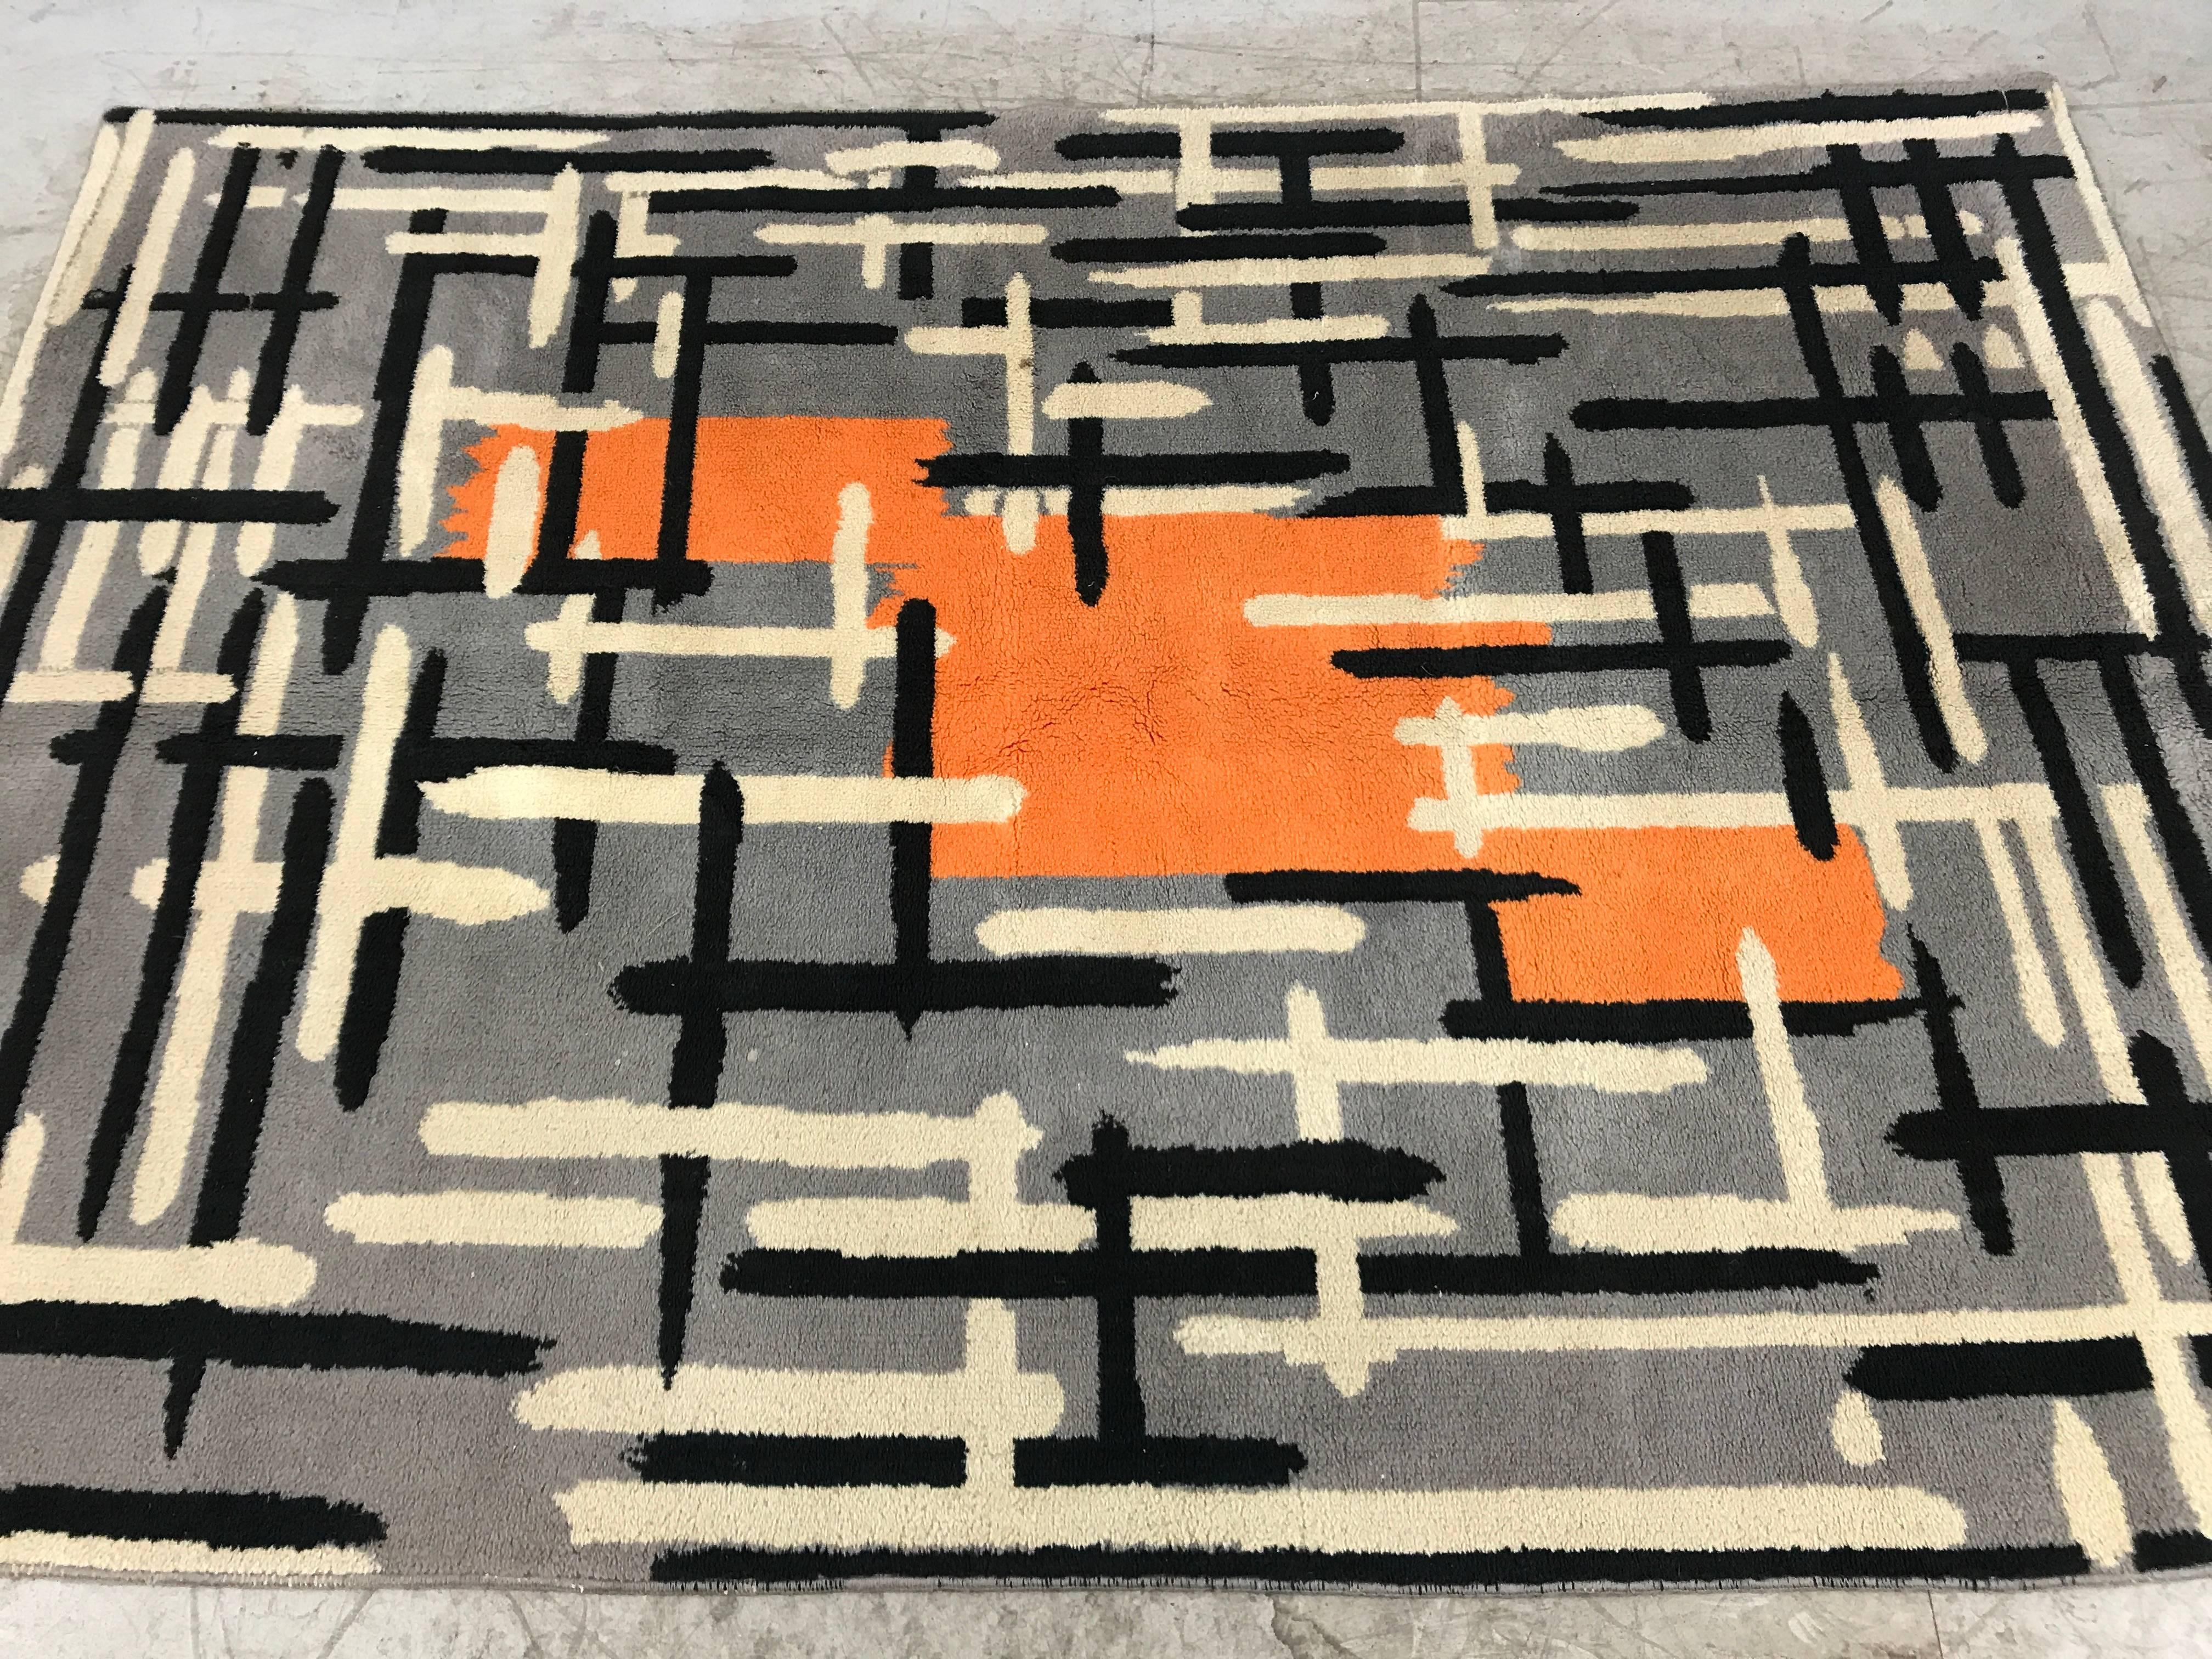 Rare French modernist all wool rug, abstract field/pattern by Jacques Borker, amazing color and field, nice original condition, retains original label (see photo).